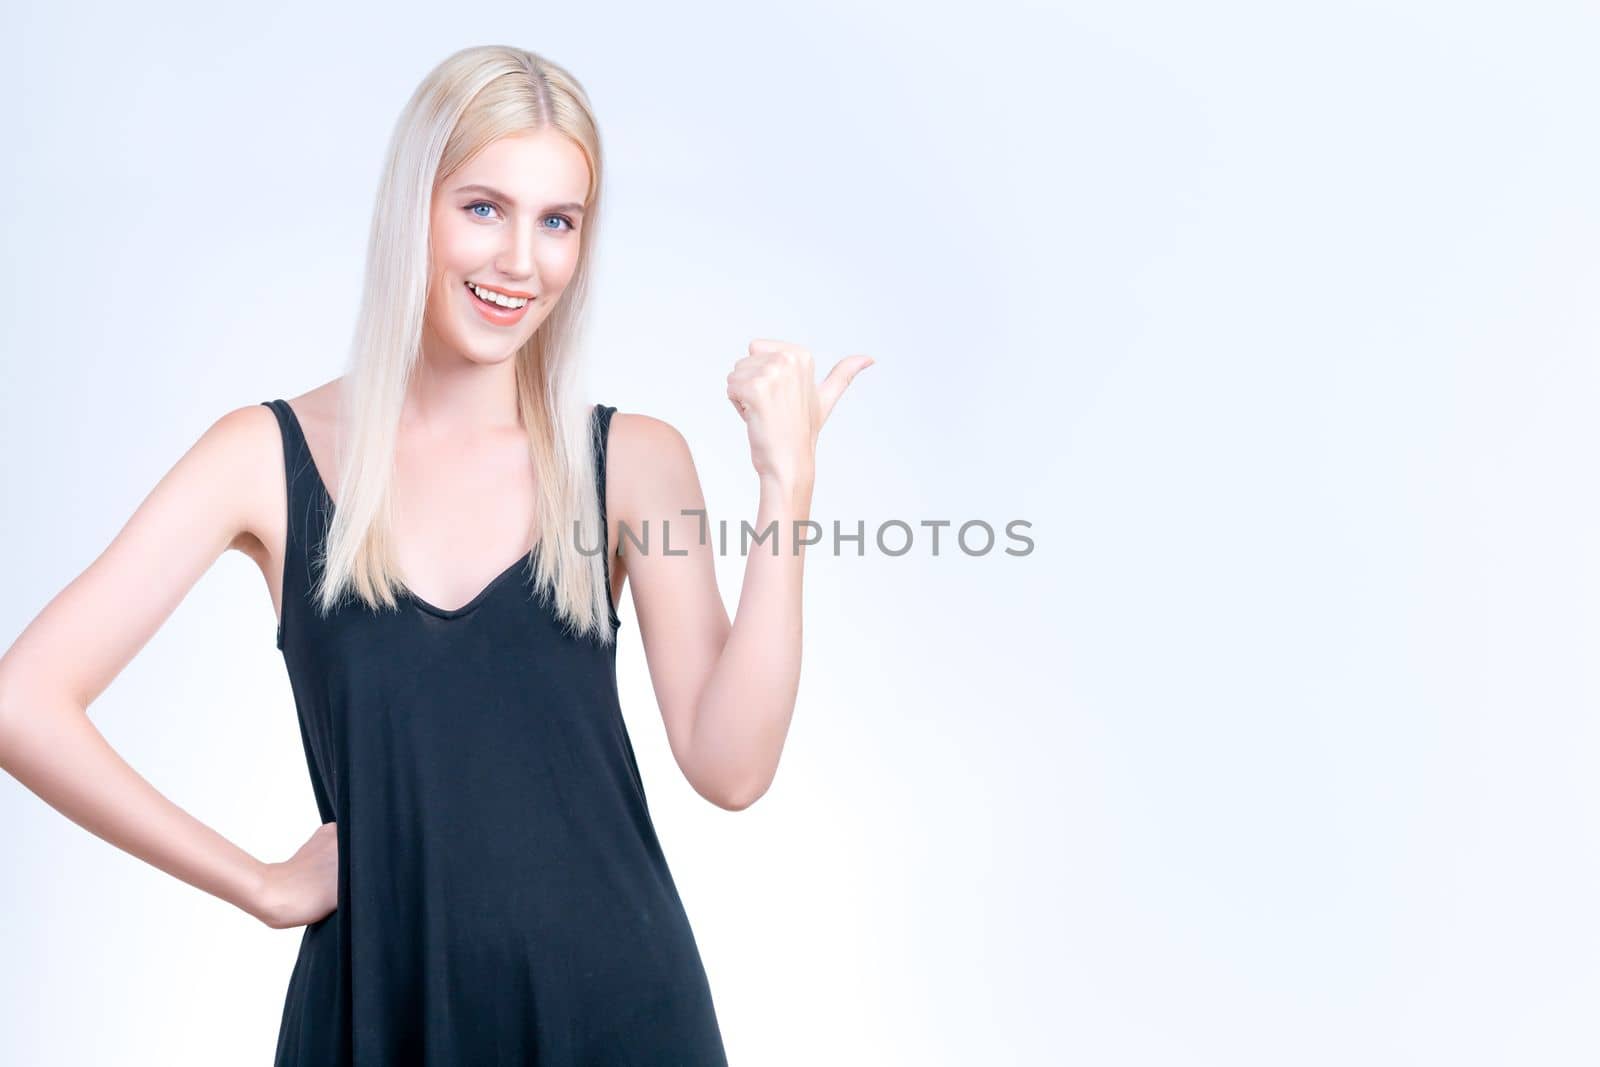 Personable beautiful woman with perfect makeup clean skin pointing finger in copyspace isolated background. Promotion indicated by hand gesture to show skincare product advertising.